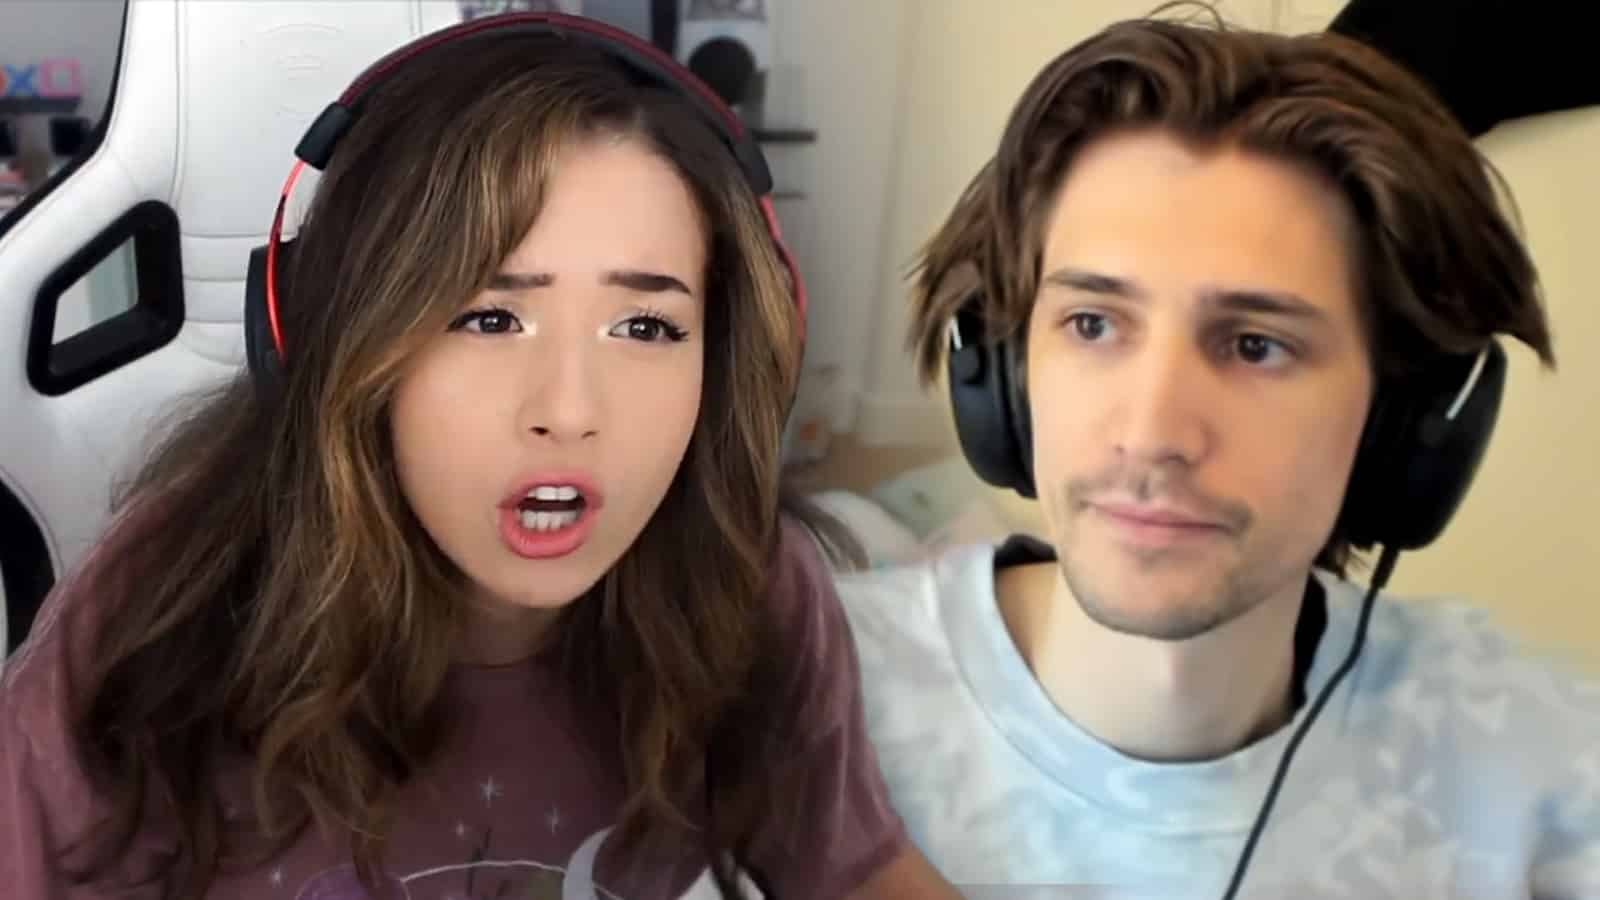 xQc weighs in on Pokimane's recent "rebellious" behaviour on Twitch.